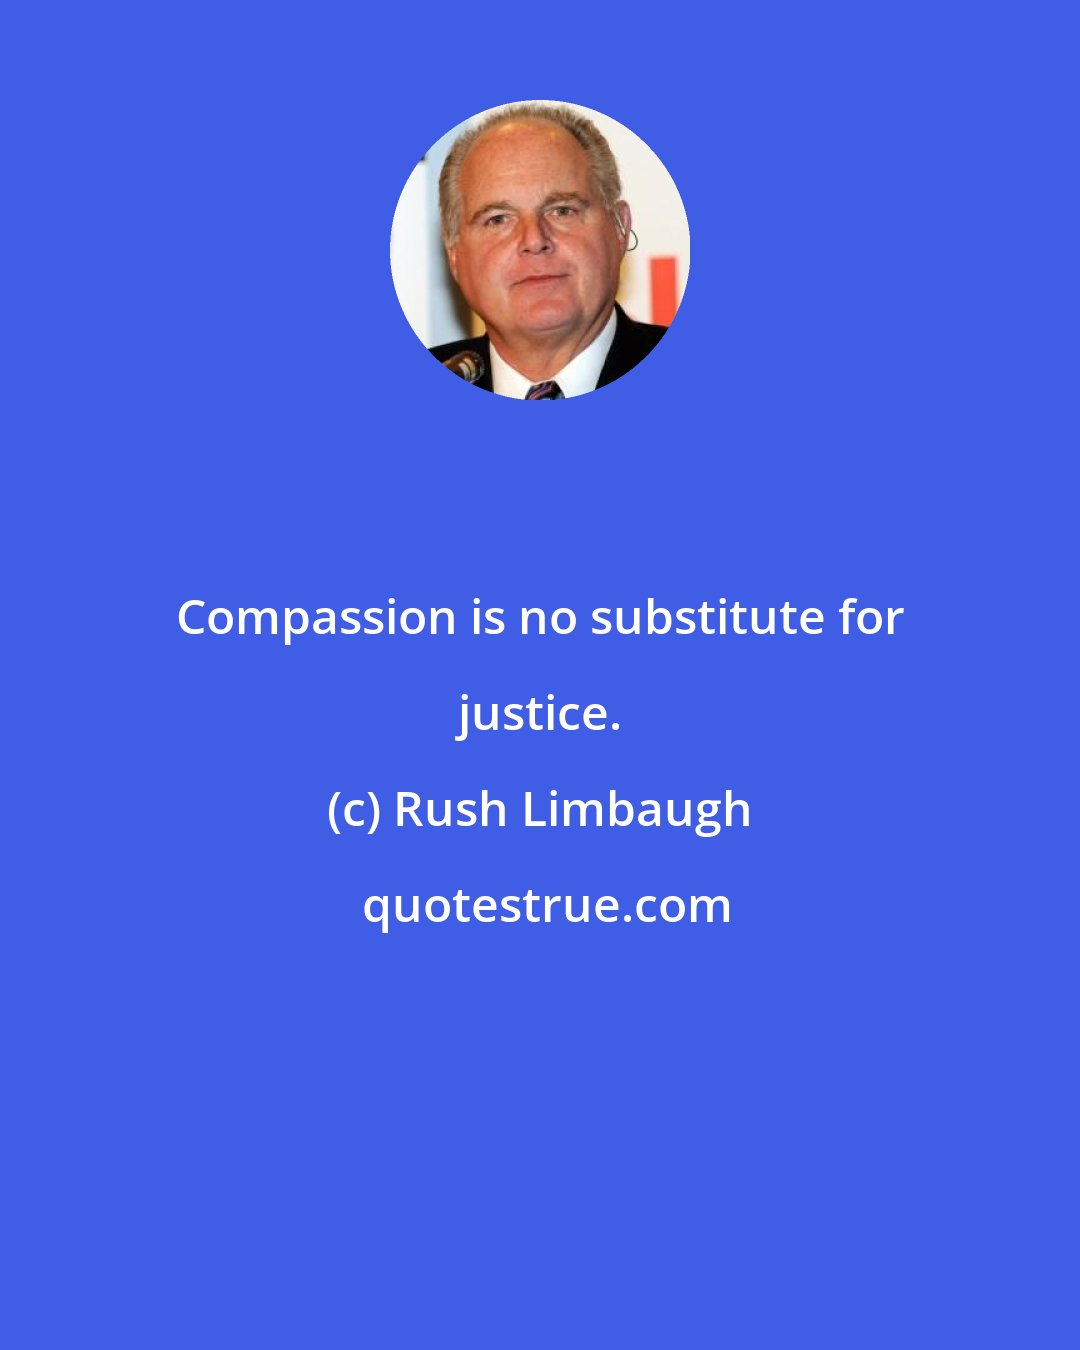 Rush Limbaugh: Compassion is no substitute for justice.